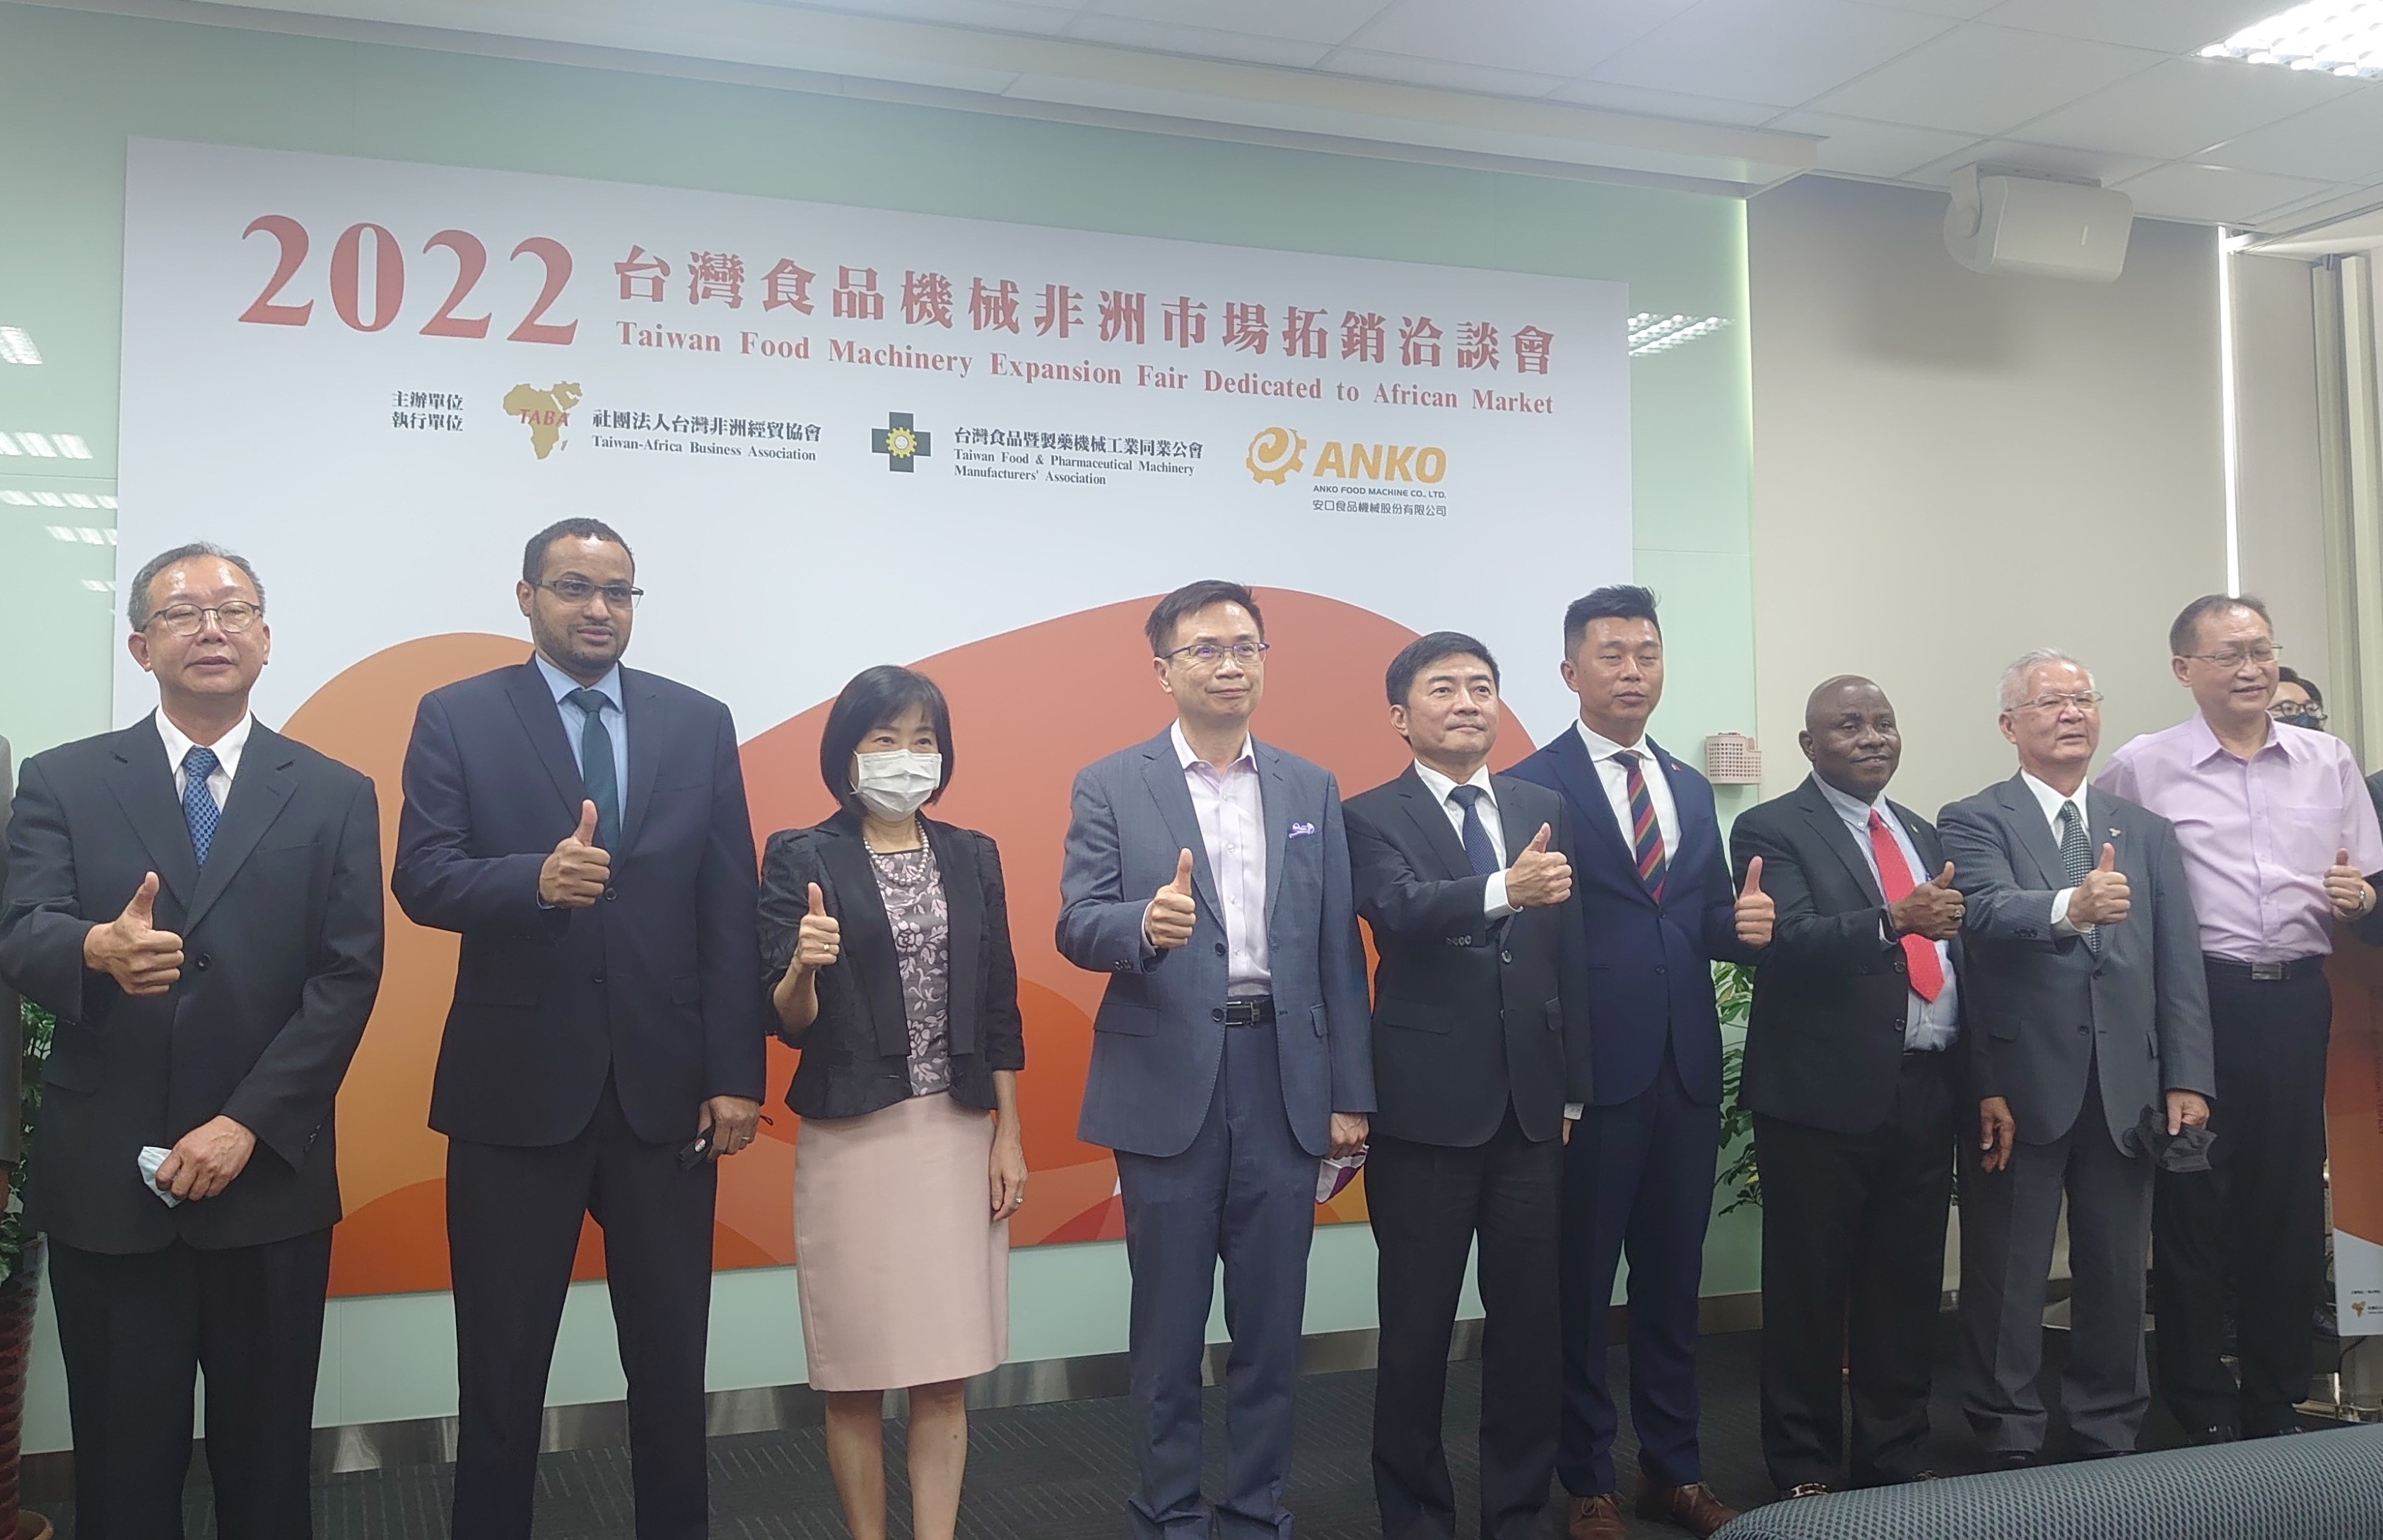 BOFT Director General Kiang  made a speech on “Taiwan Food Machinery Marketing Meeting on Trade Promotion in African Countries”